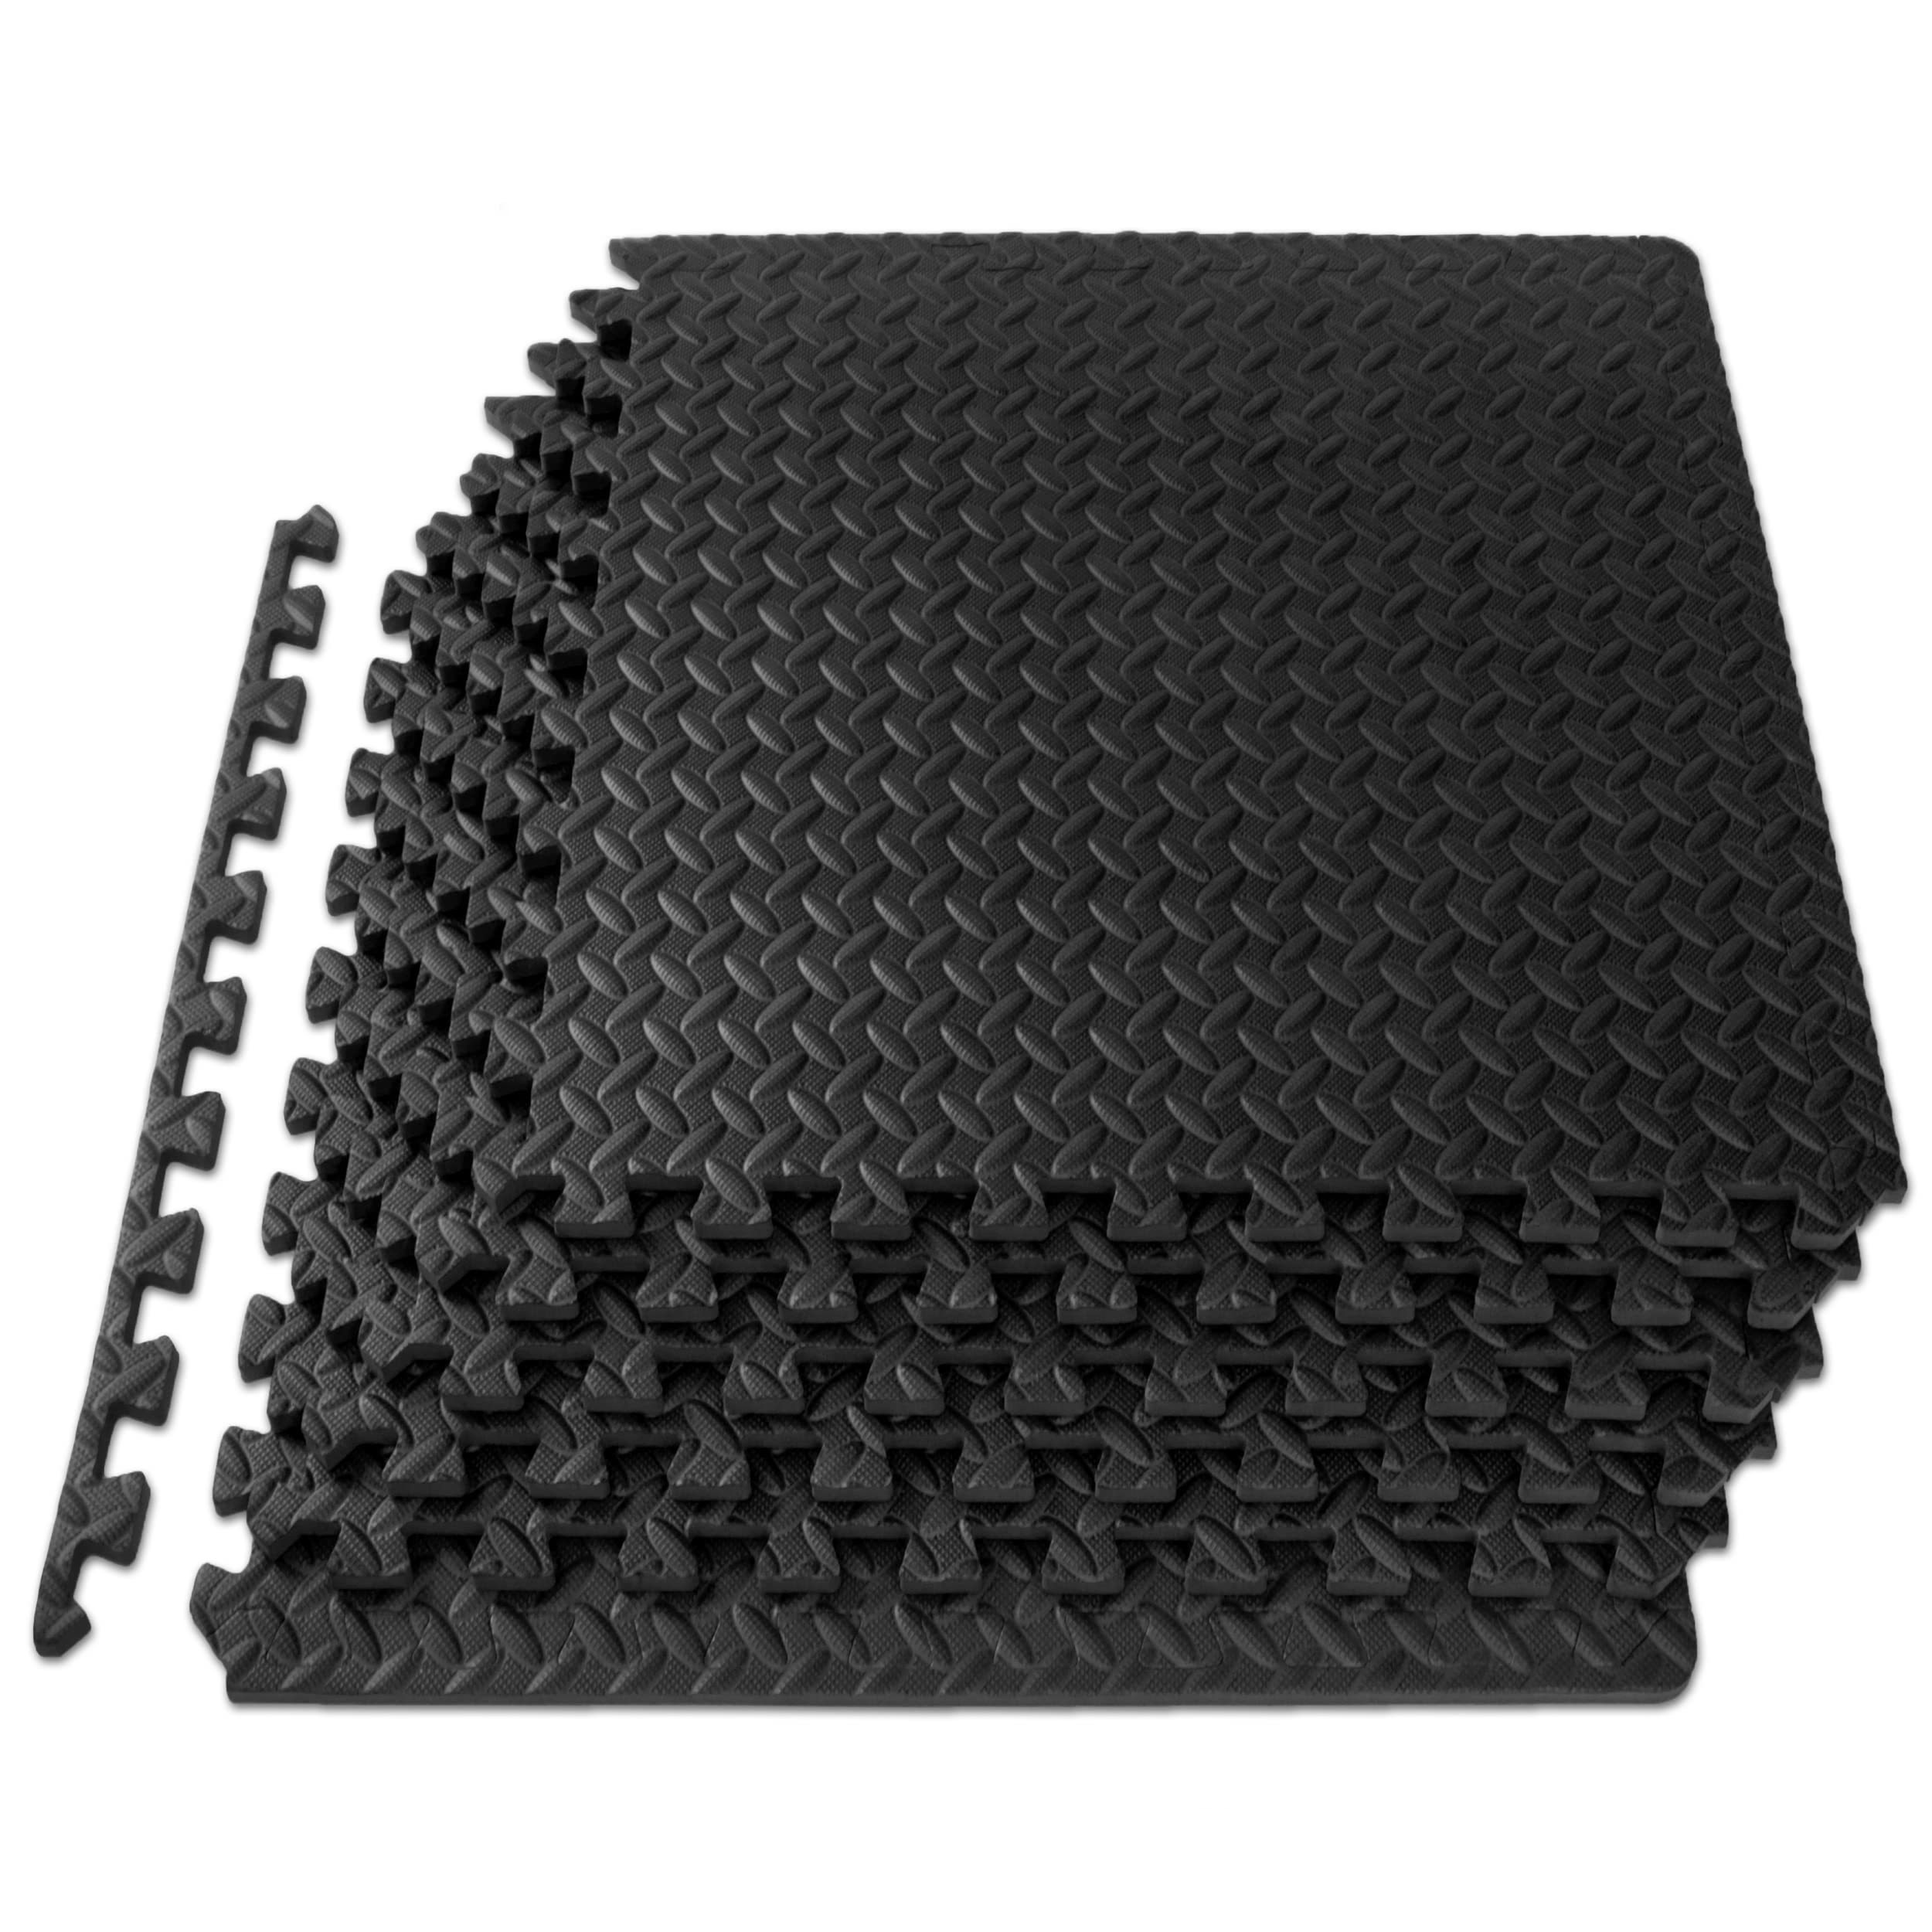 

10pcs Eva Interlocking Floor Mats, Soft Waterproof Durable Splicing Fitness Mats, Suitable For Home & Gym Workout, Body Training